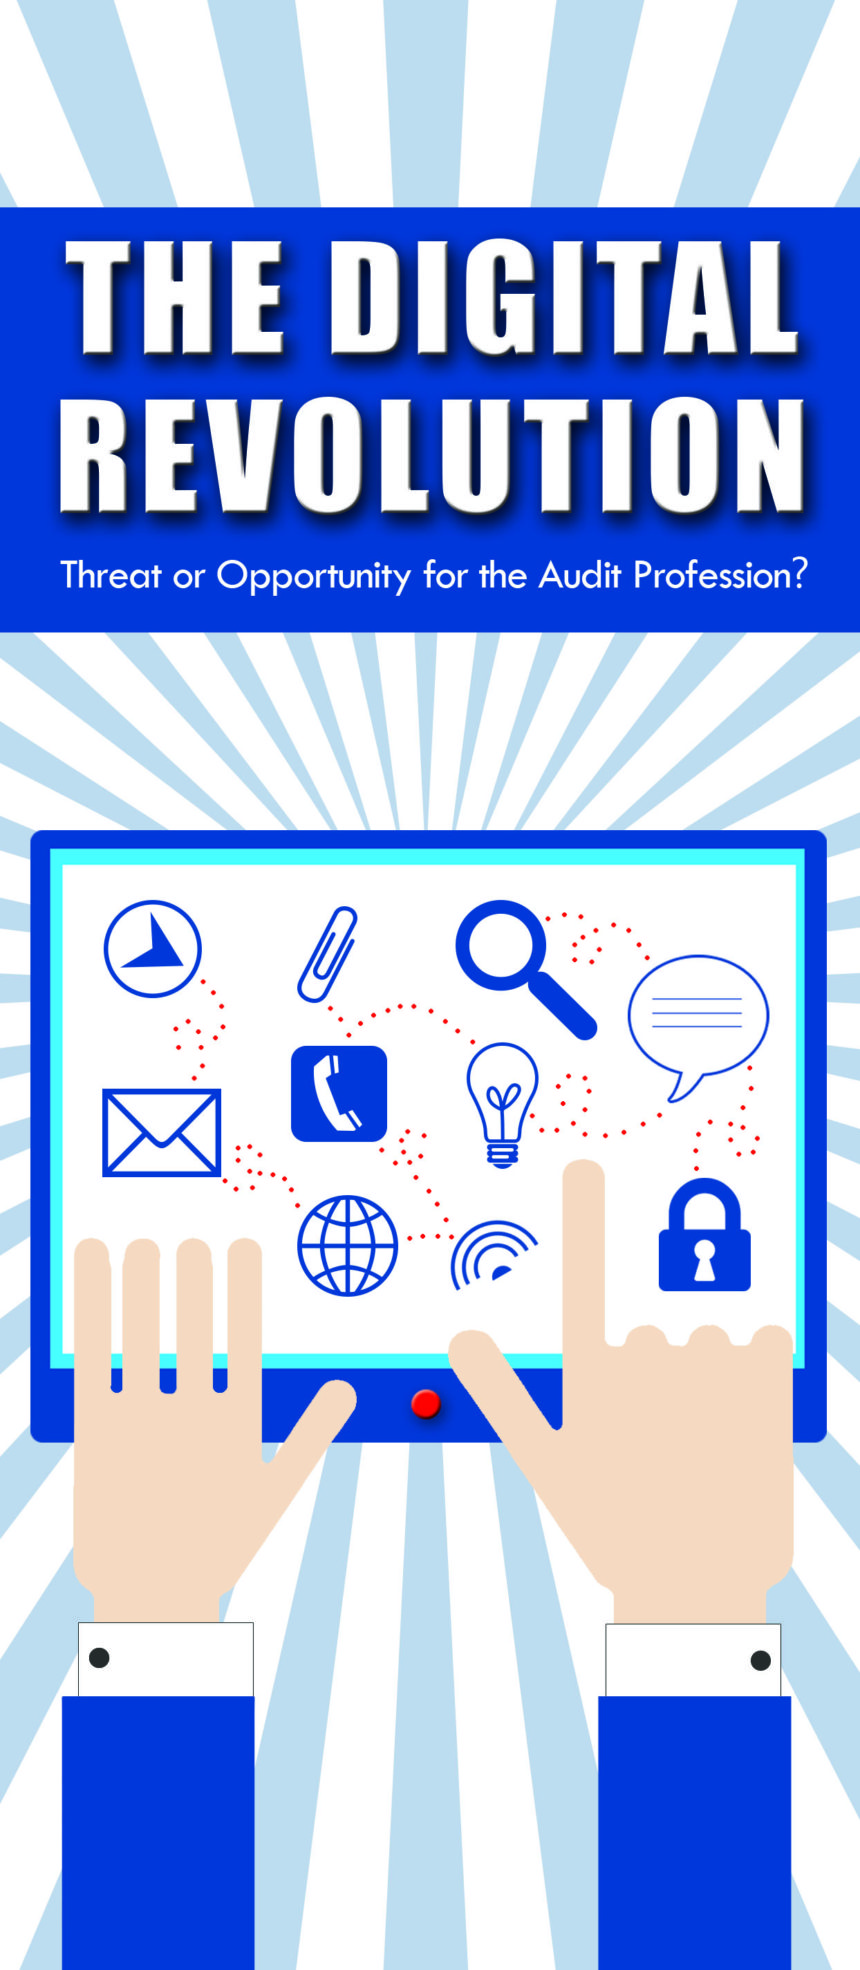 The Digital Revolution: Threat or Opportunity for the Audit Profession